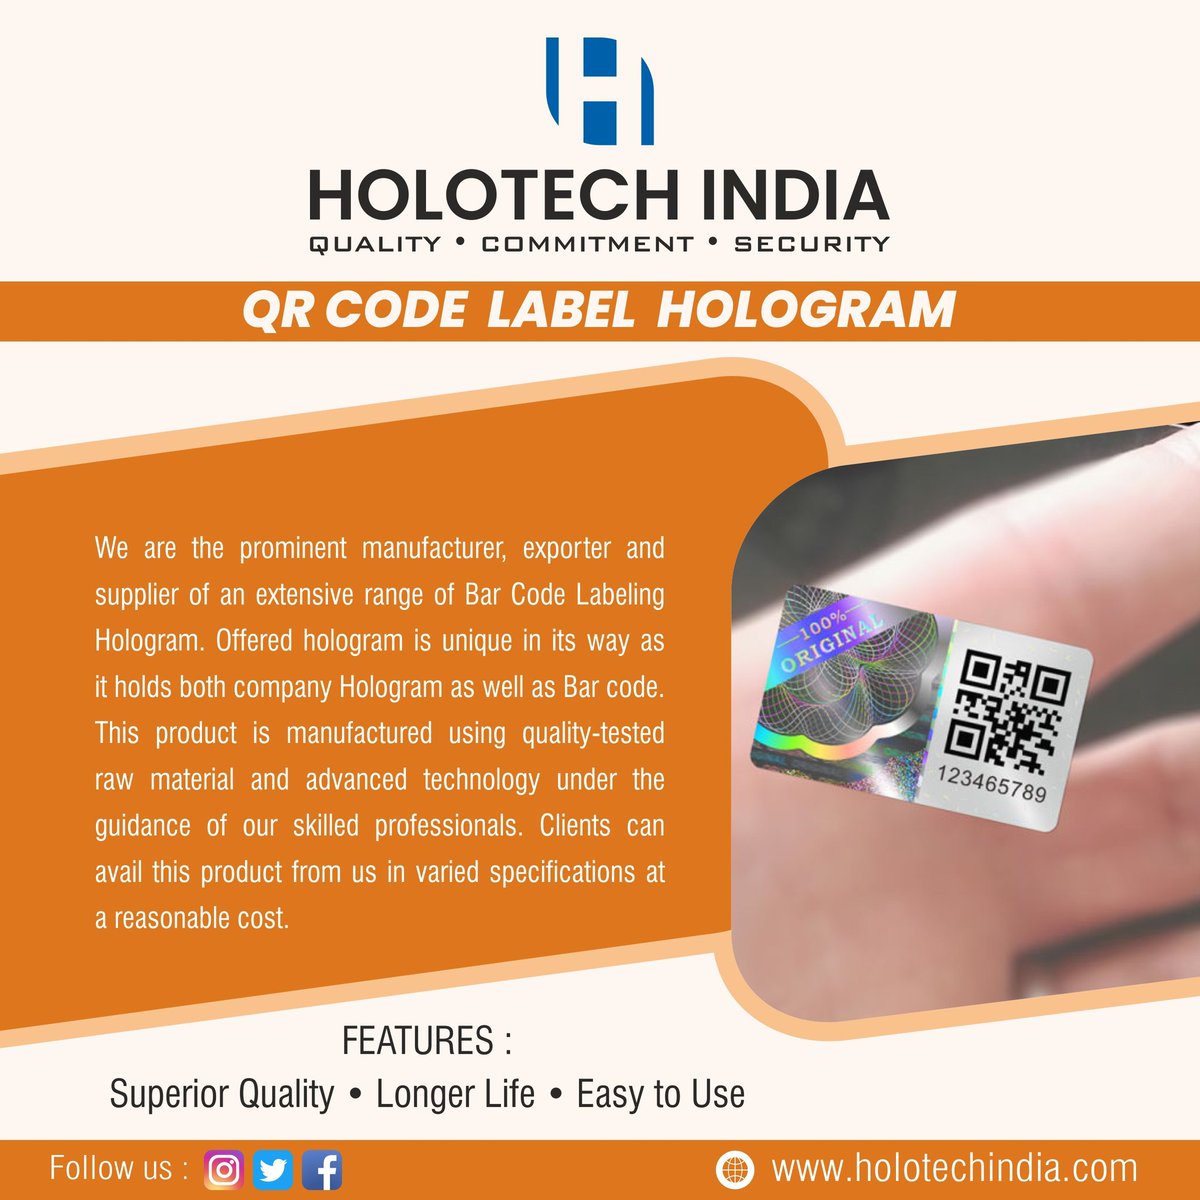 Need QR Code Labels? 
Contact us for more details and get best quotation from us. 

📧: holotechindia@gmail.com 

#holotech #india #holotechindia #barcode #barcodelabels #qr #code #qrcodes #qrcode #stickers #barcodescanner #hologramsticker #security #securitysystem